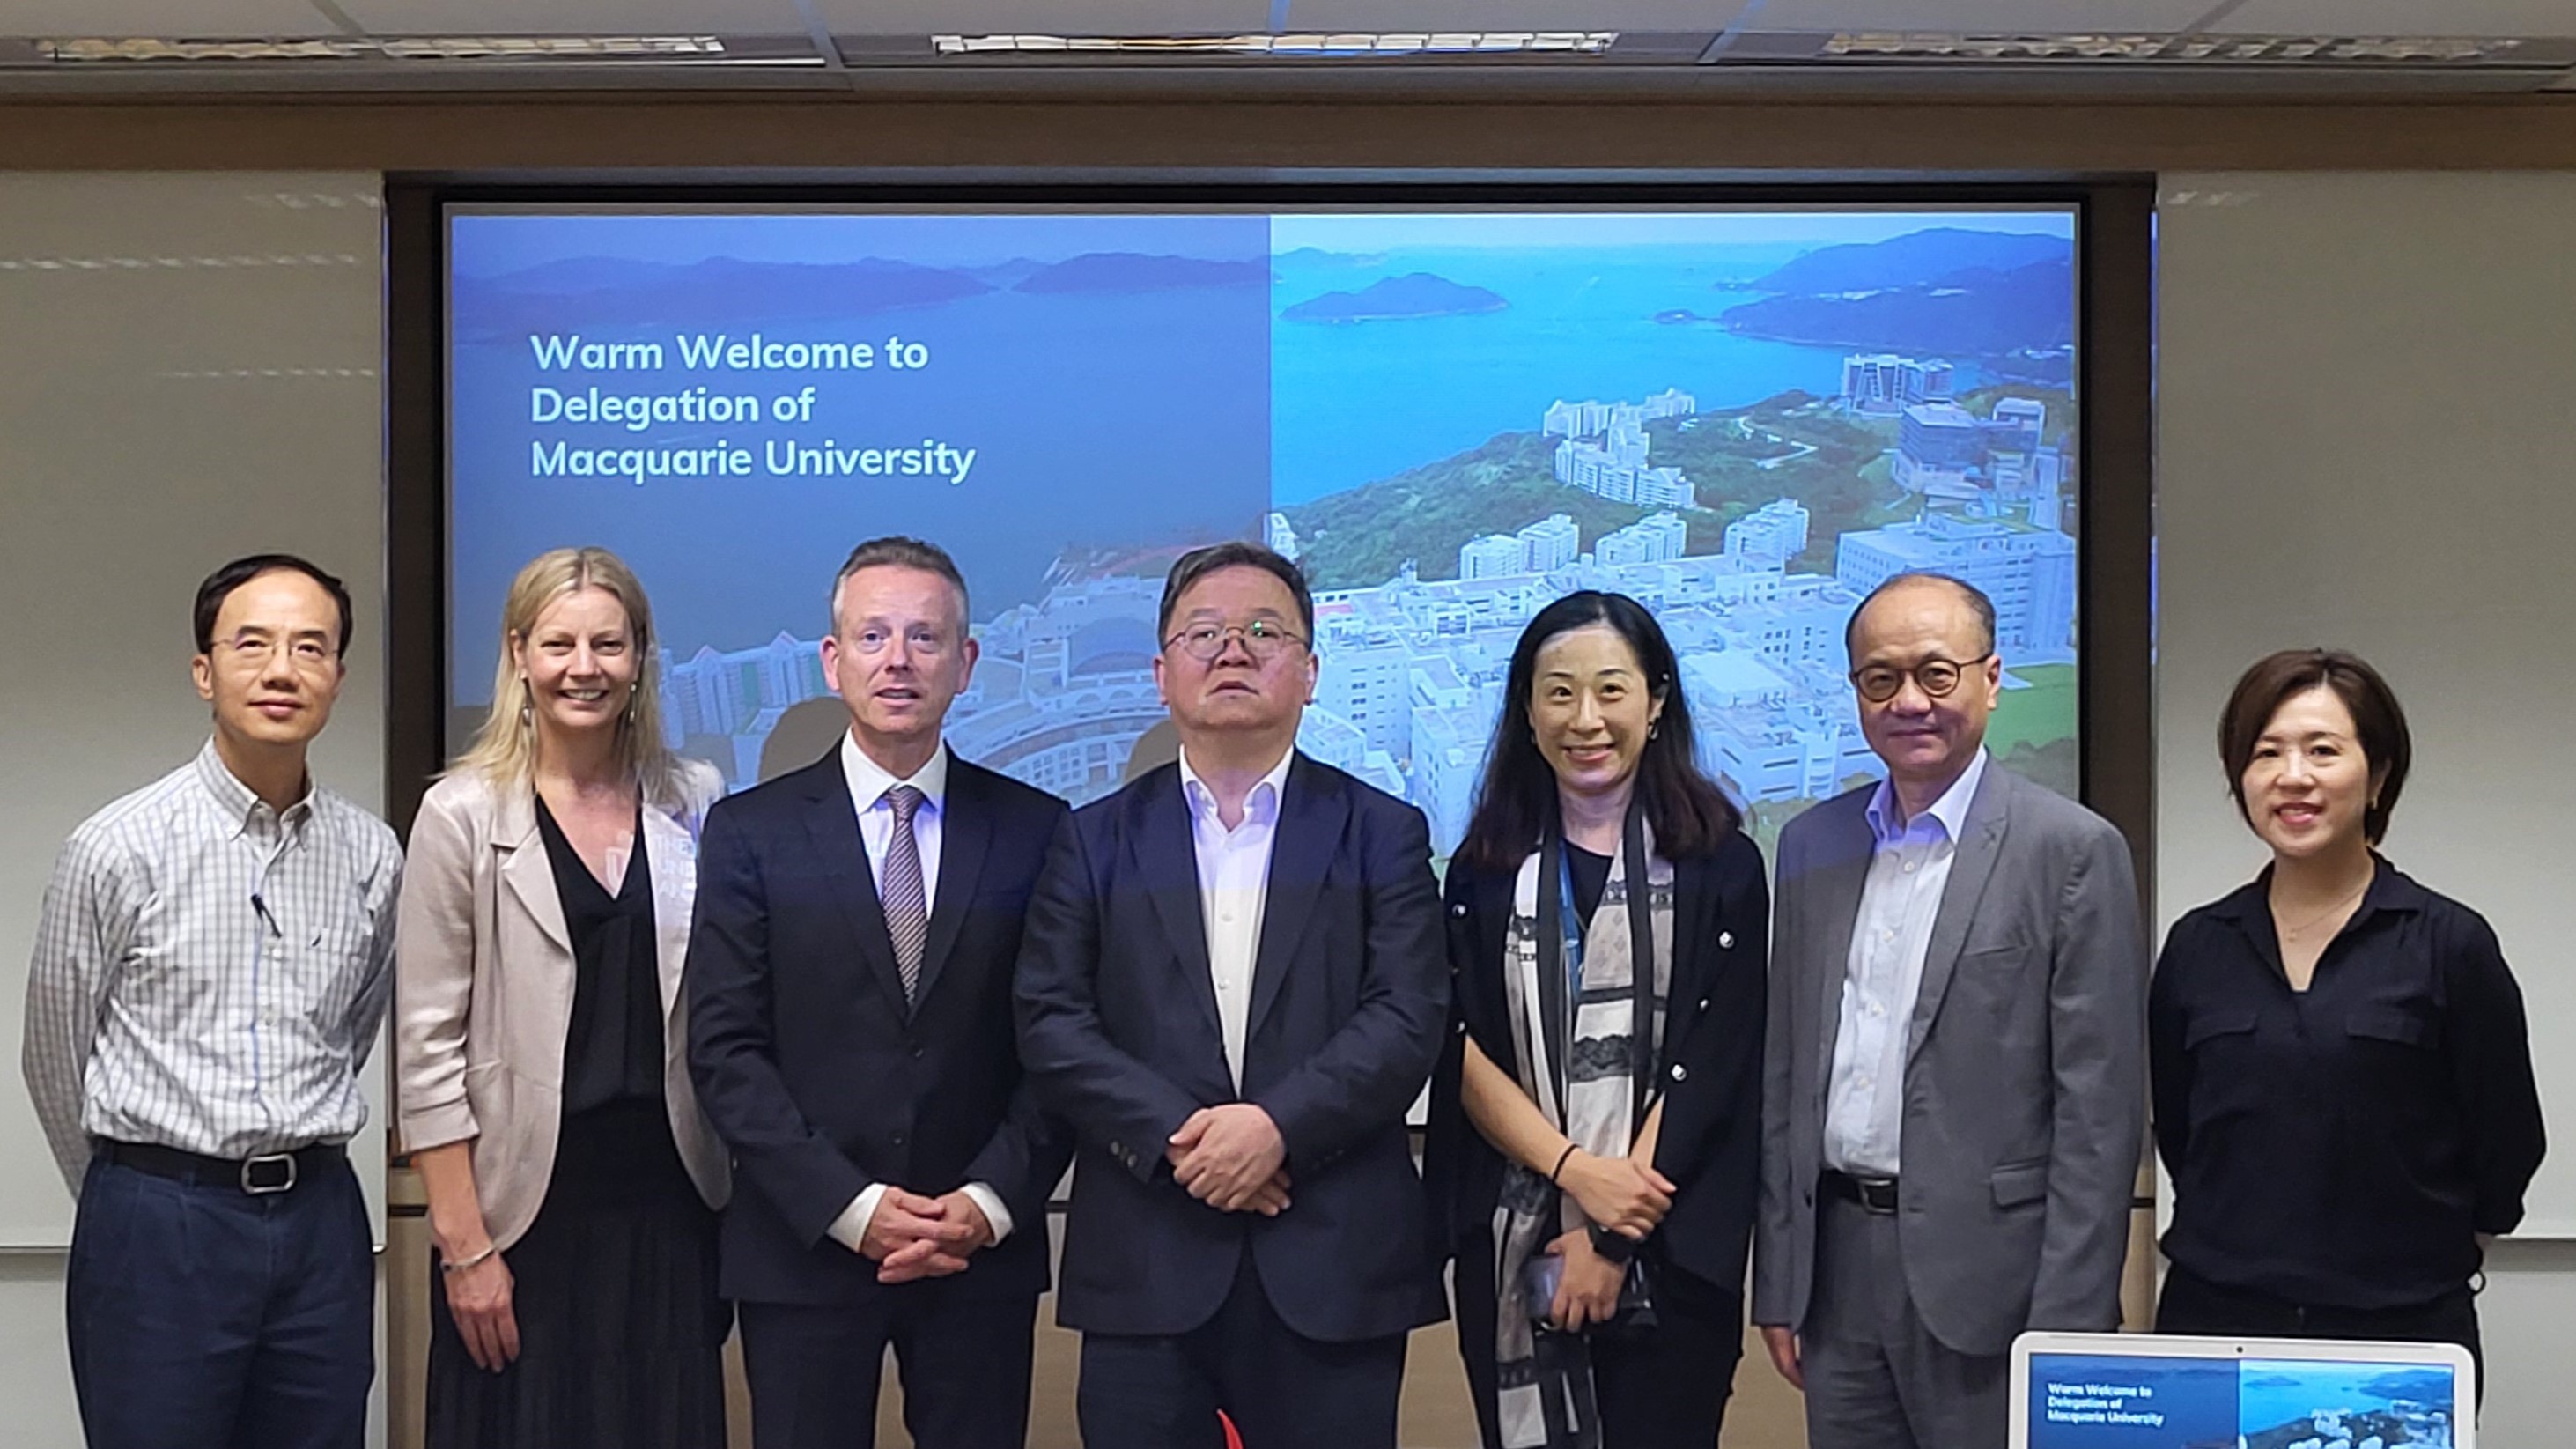 A group photo of Macquarie University  delegation Deputy Vice-Chancellor of Academic Prof. Rorden WILKINSON (third left) and Pro Vice-Chancellor of Education Prof. Taryn JONES (second left) with HKUST Provost Prof. GUO Yike (center); Associate Provost for Teaching & Learning Prof. Jimmy FUNG(first left); Assistant Dean (Administration) & MSc Program Director, School of Business & Management Mr. Chris TSANG (second right), Head of Global Learning Ms. Euphemia CHOW (first right) and Head of Global Engagement 